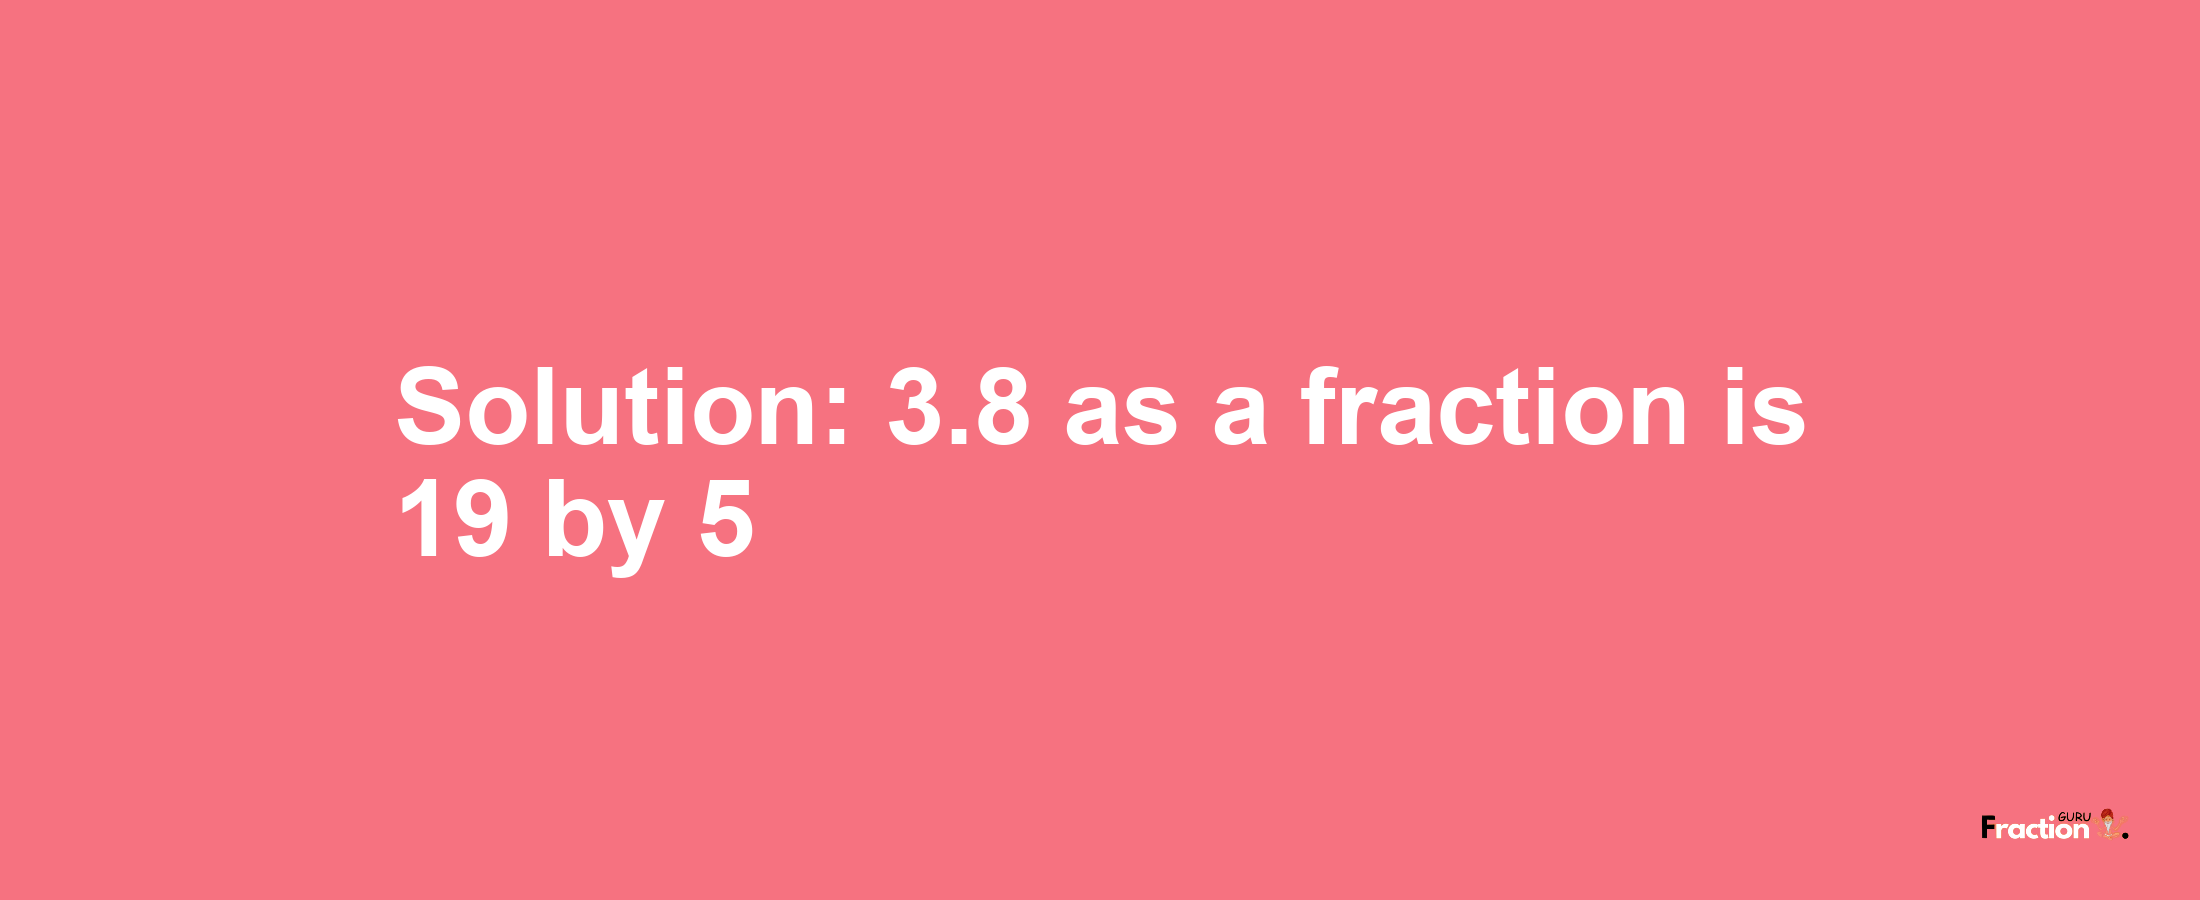 Solution:3.8 as a fraction is 19/5